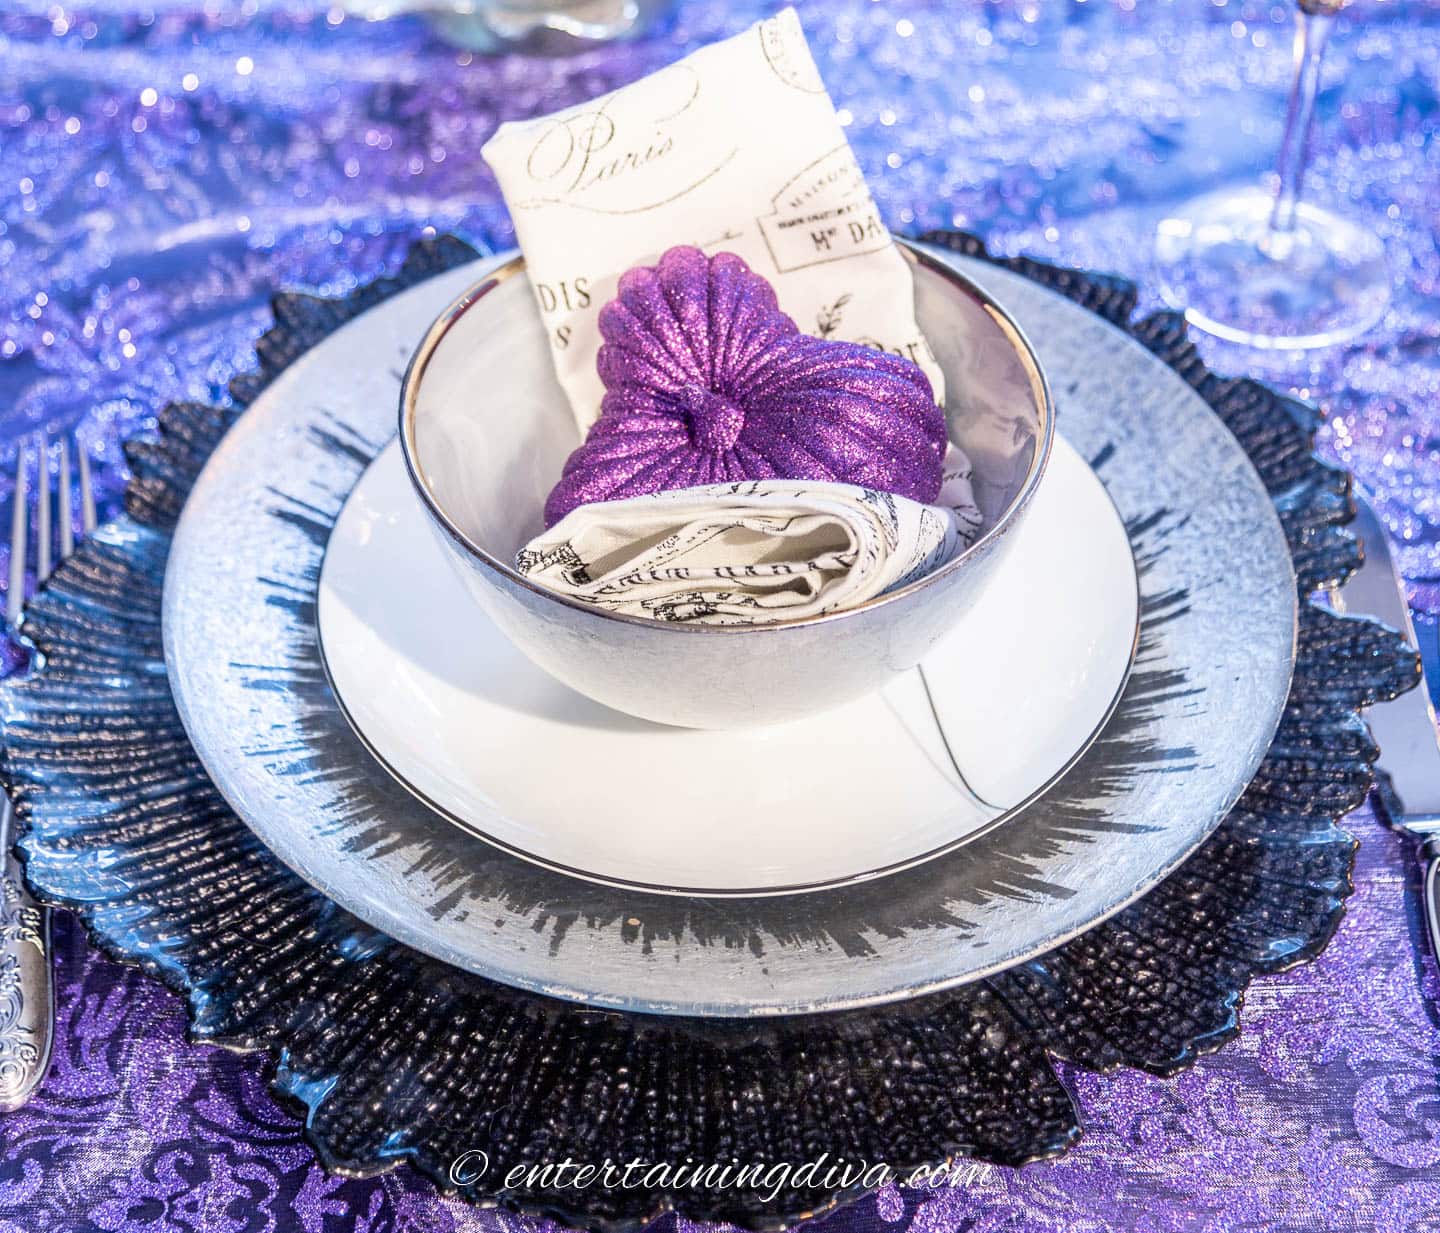 Elegant Halloween place setting with a faux purple pumpkin, black and white napkins, silver and white plates on a black charger